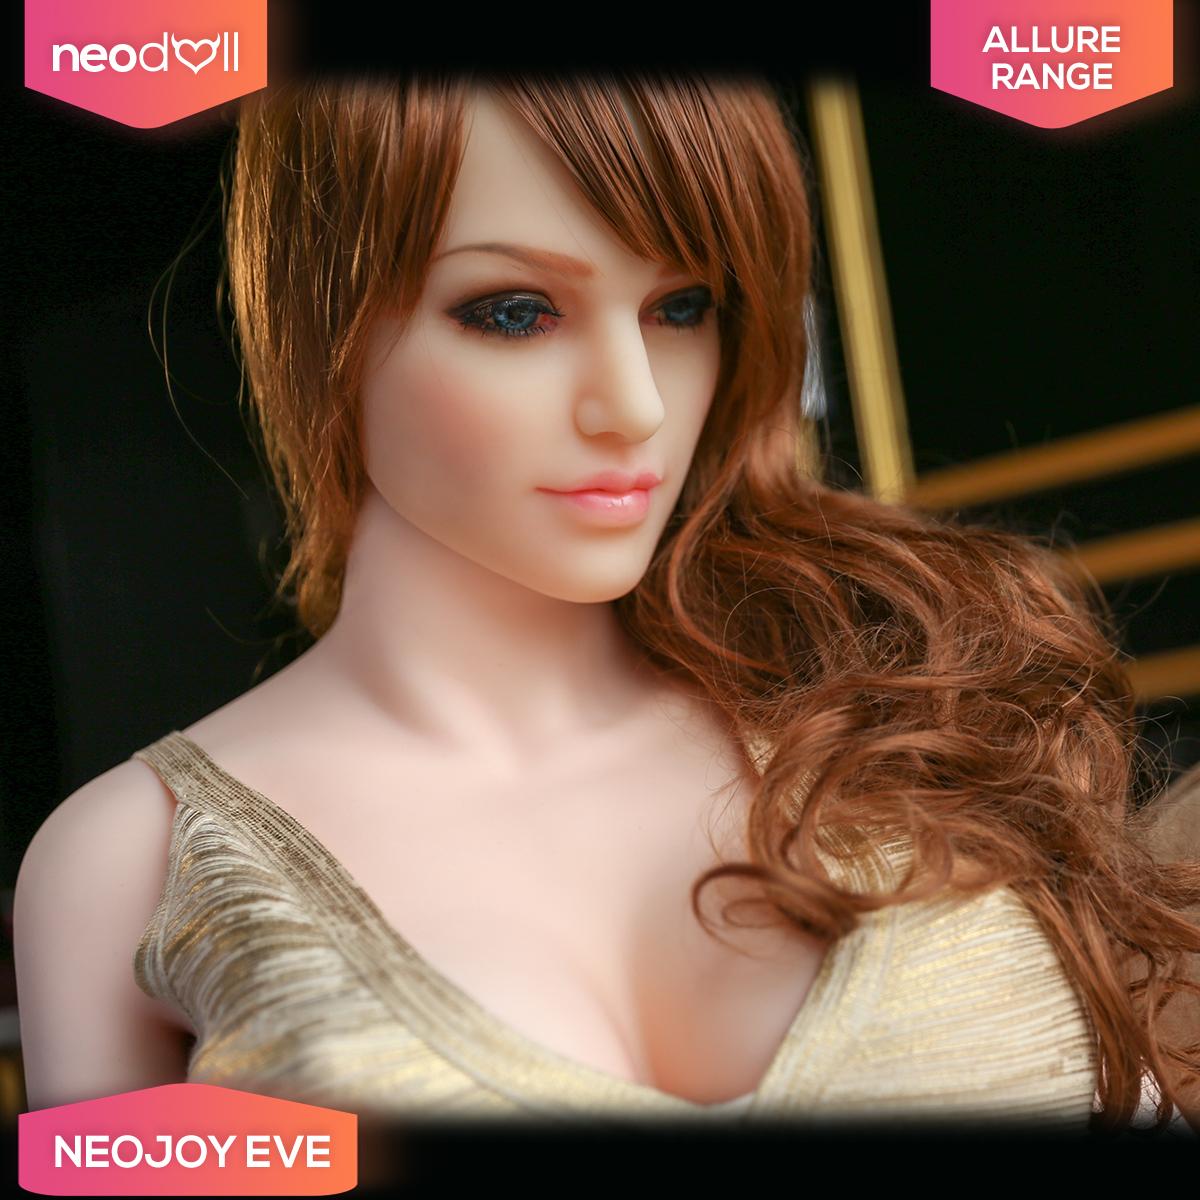 Neodoll Allure Eve - Realistic Sex Doll - 165cm - Natural